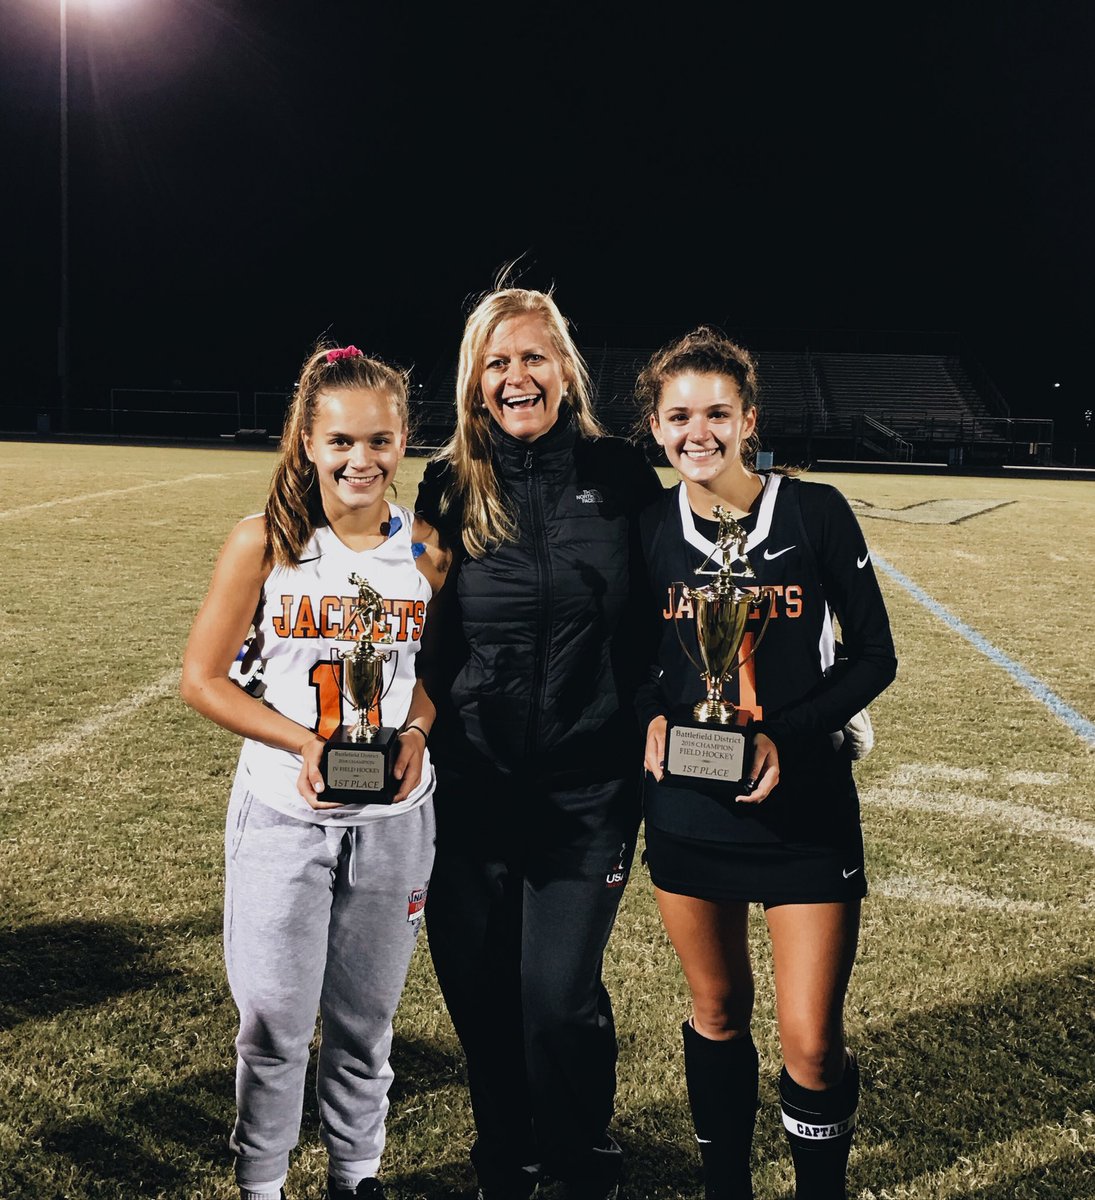 Even though she’s in 8th grade, the Rigual sisters were still able to secure the bag🏆 #runsinthefam #coachcory